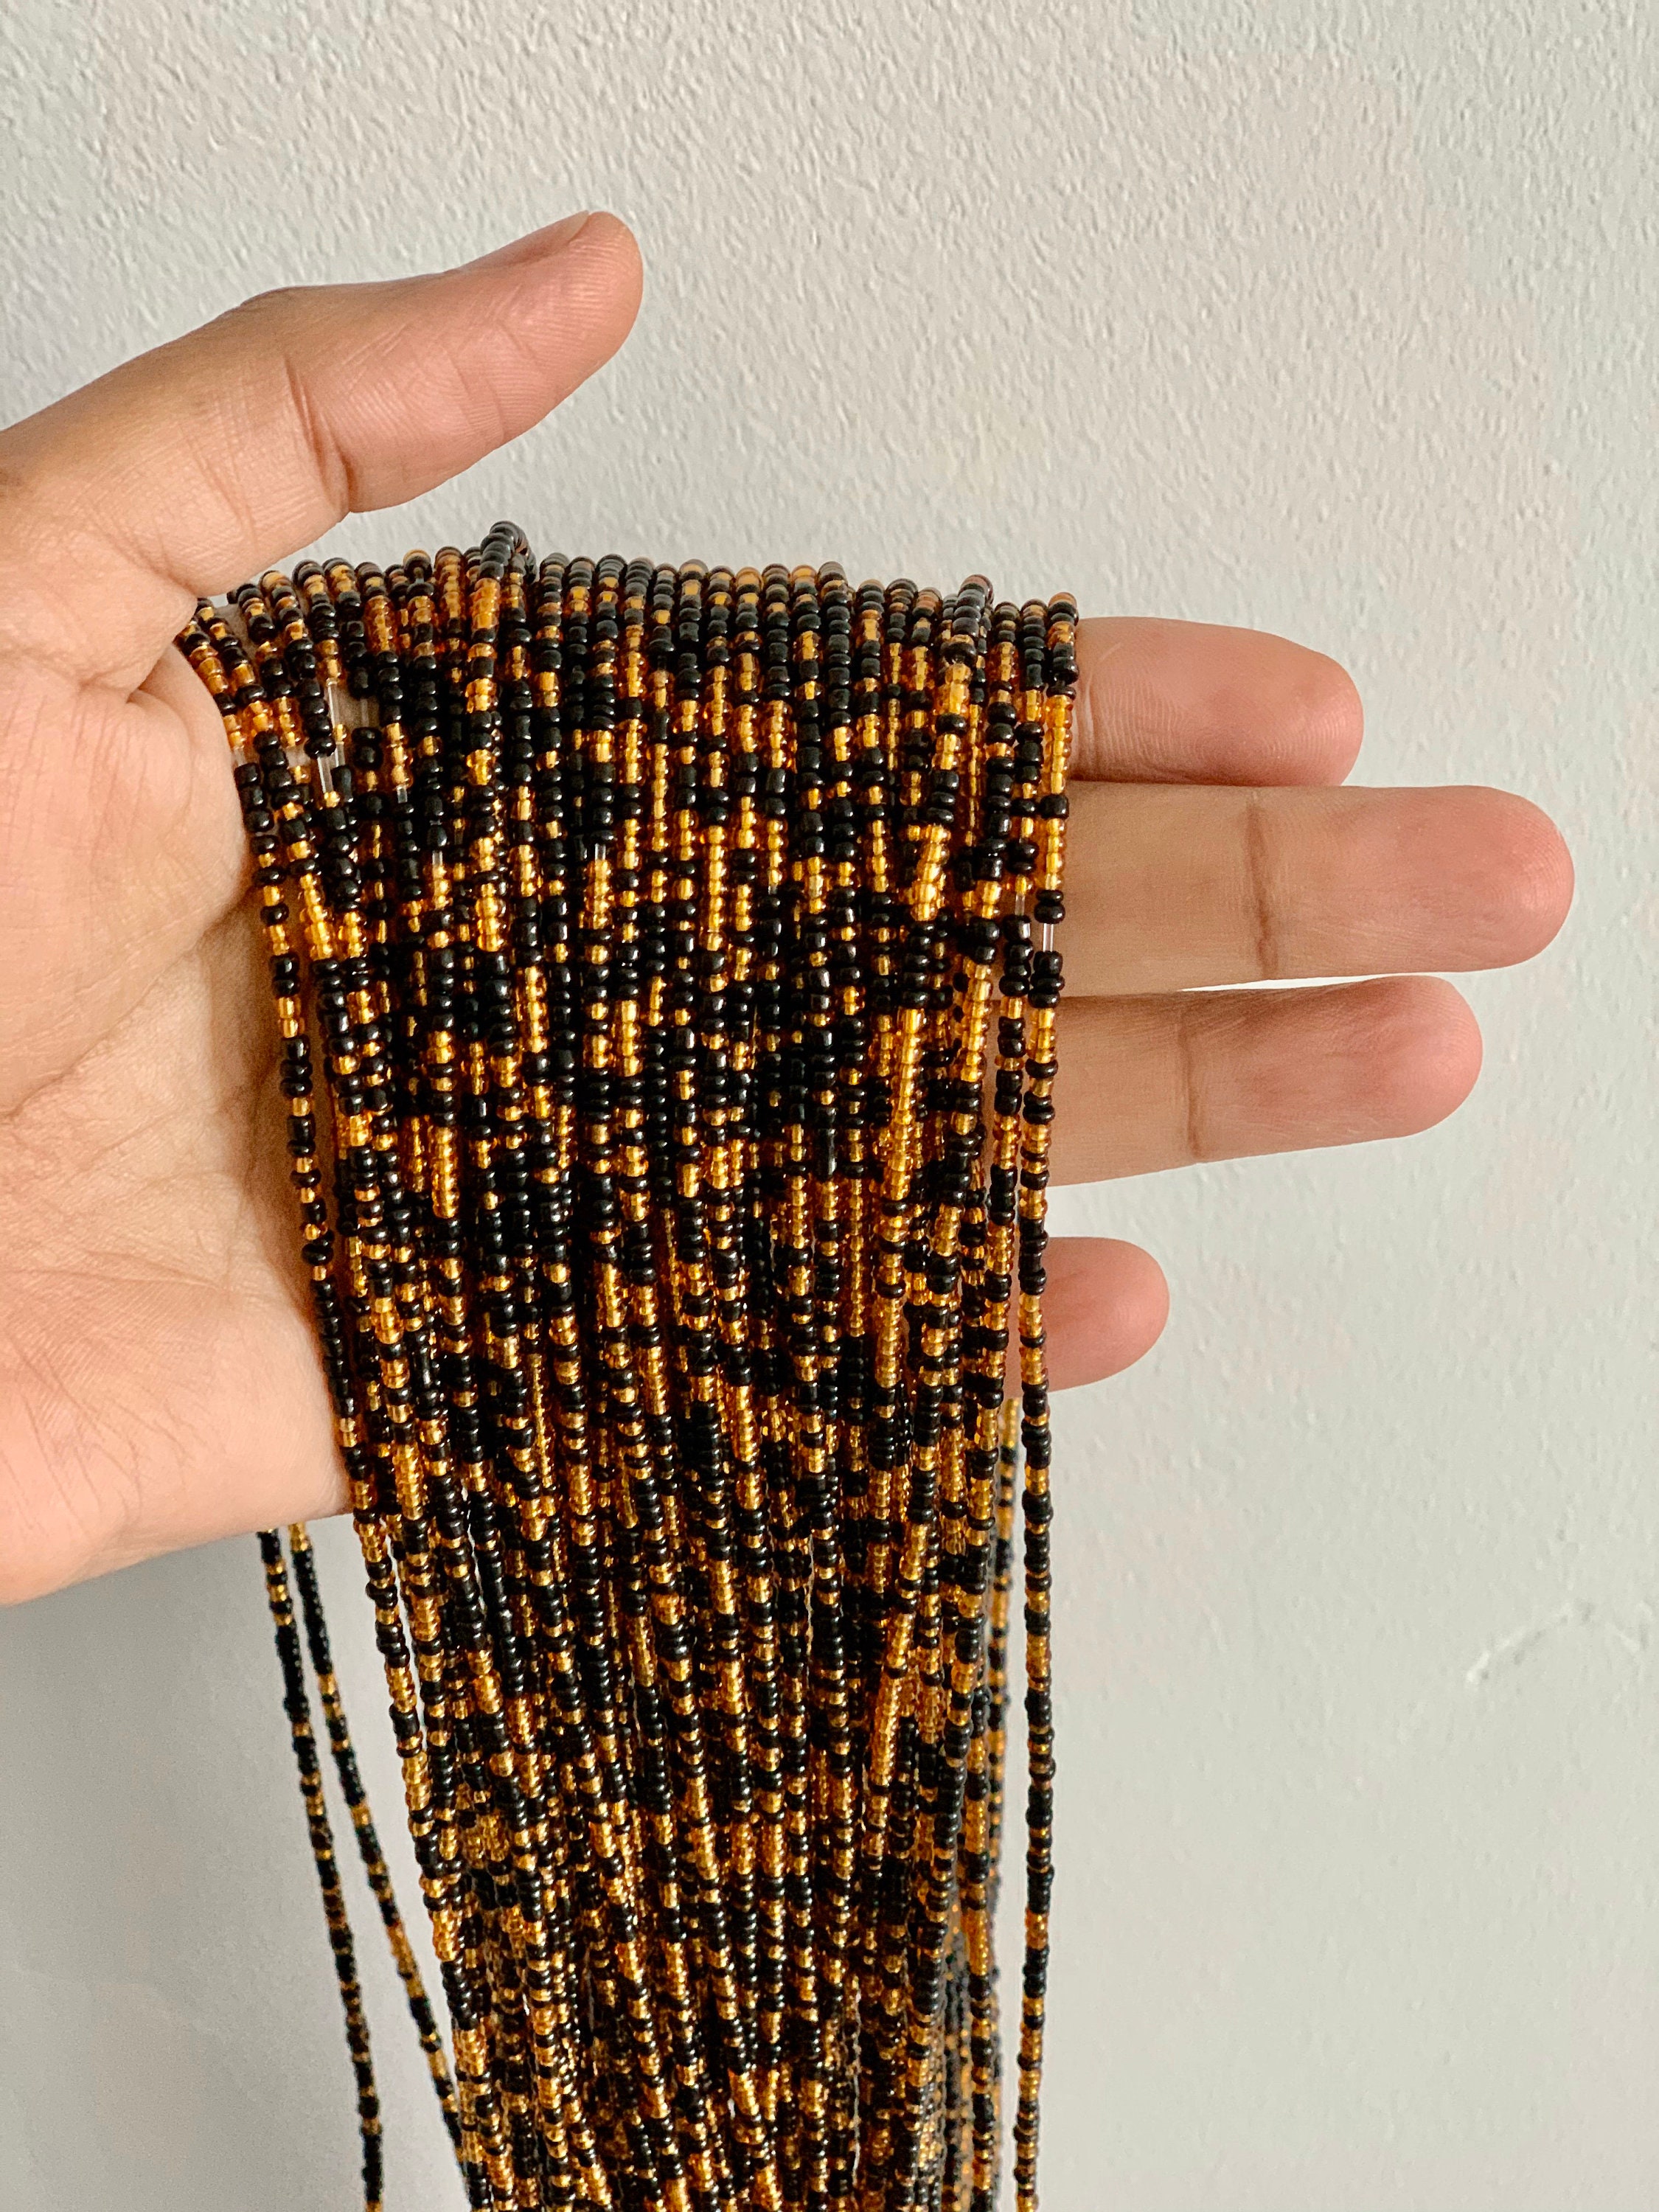 African body jewelry stretchy belly beads authentic gold African elastic waist beds with pearls black owned waist beads for weight loss